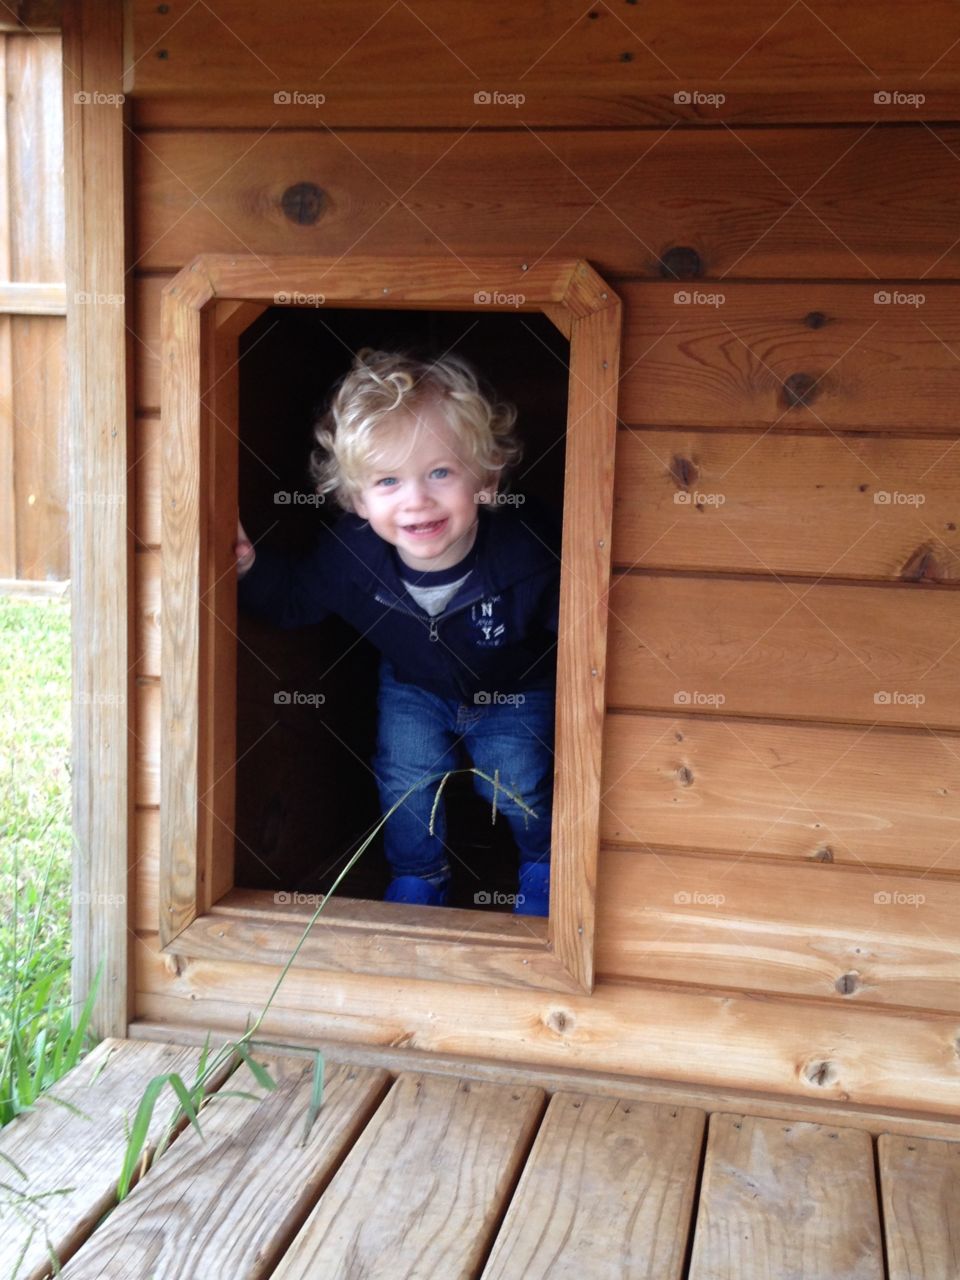 Toddler in dog house. Peek a boo